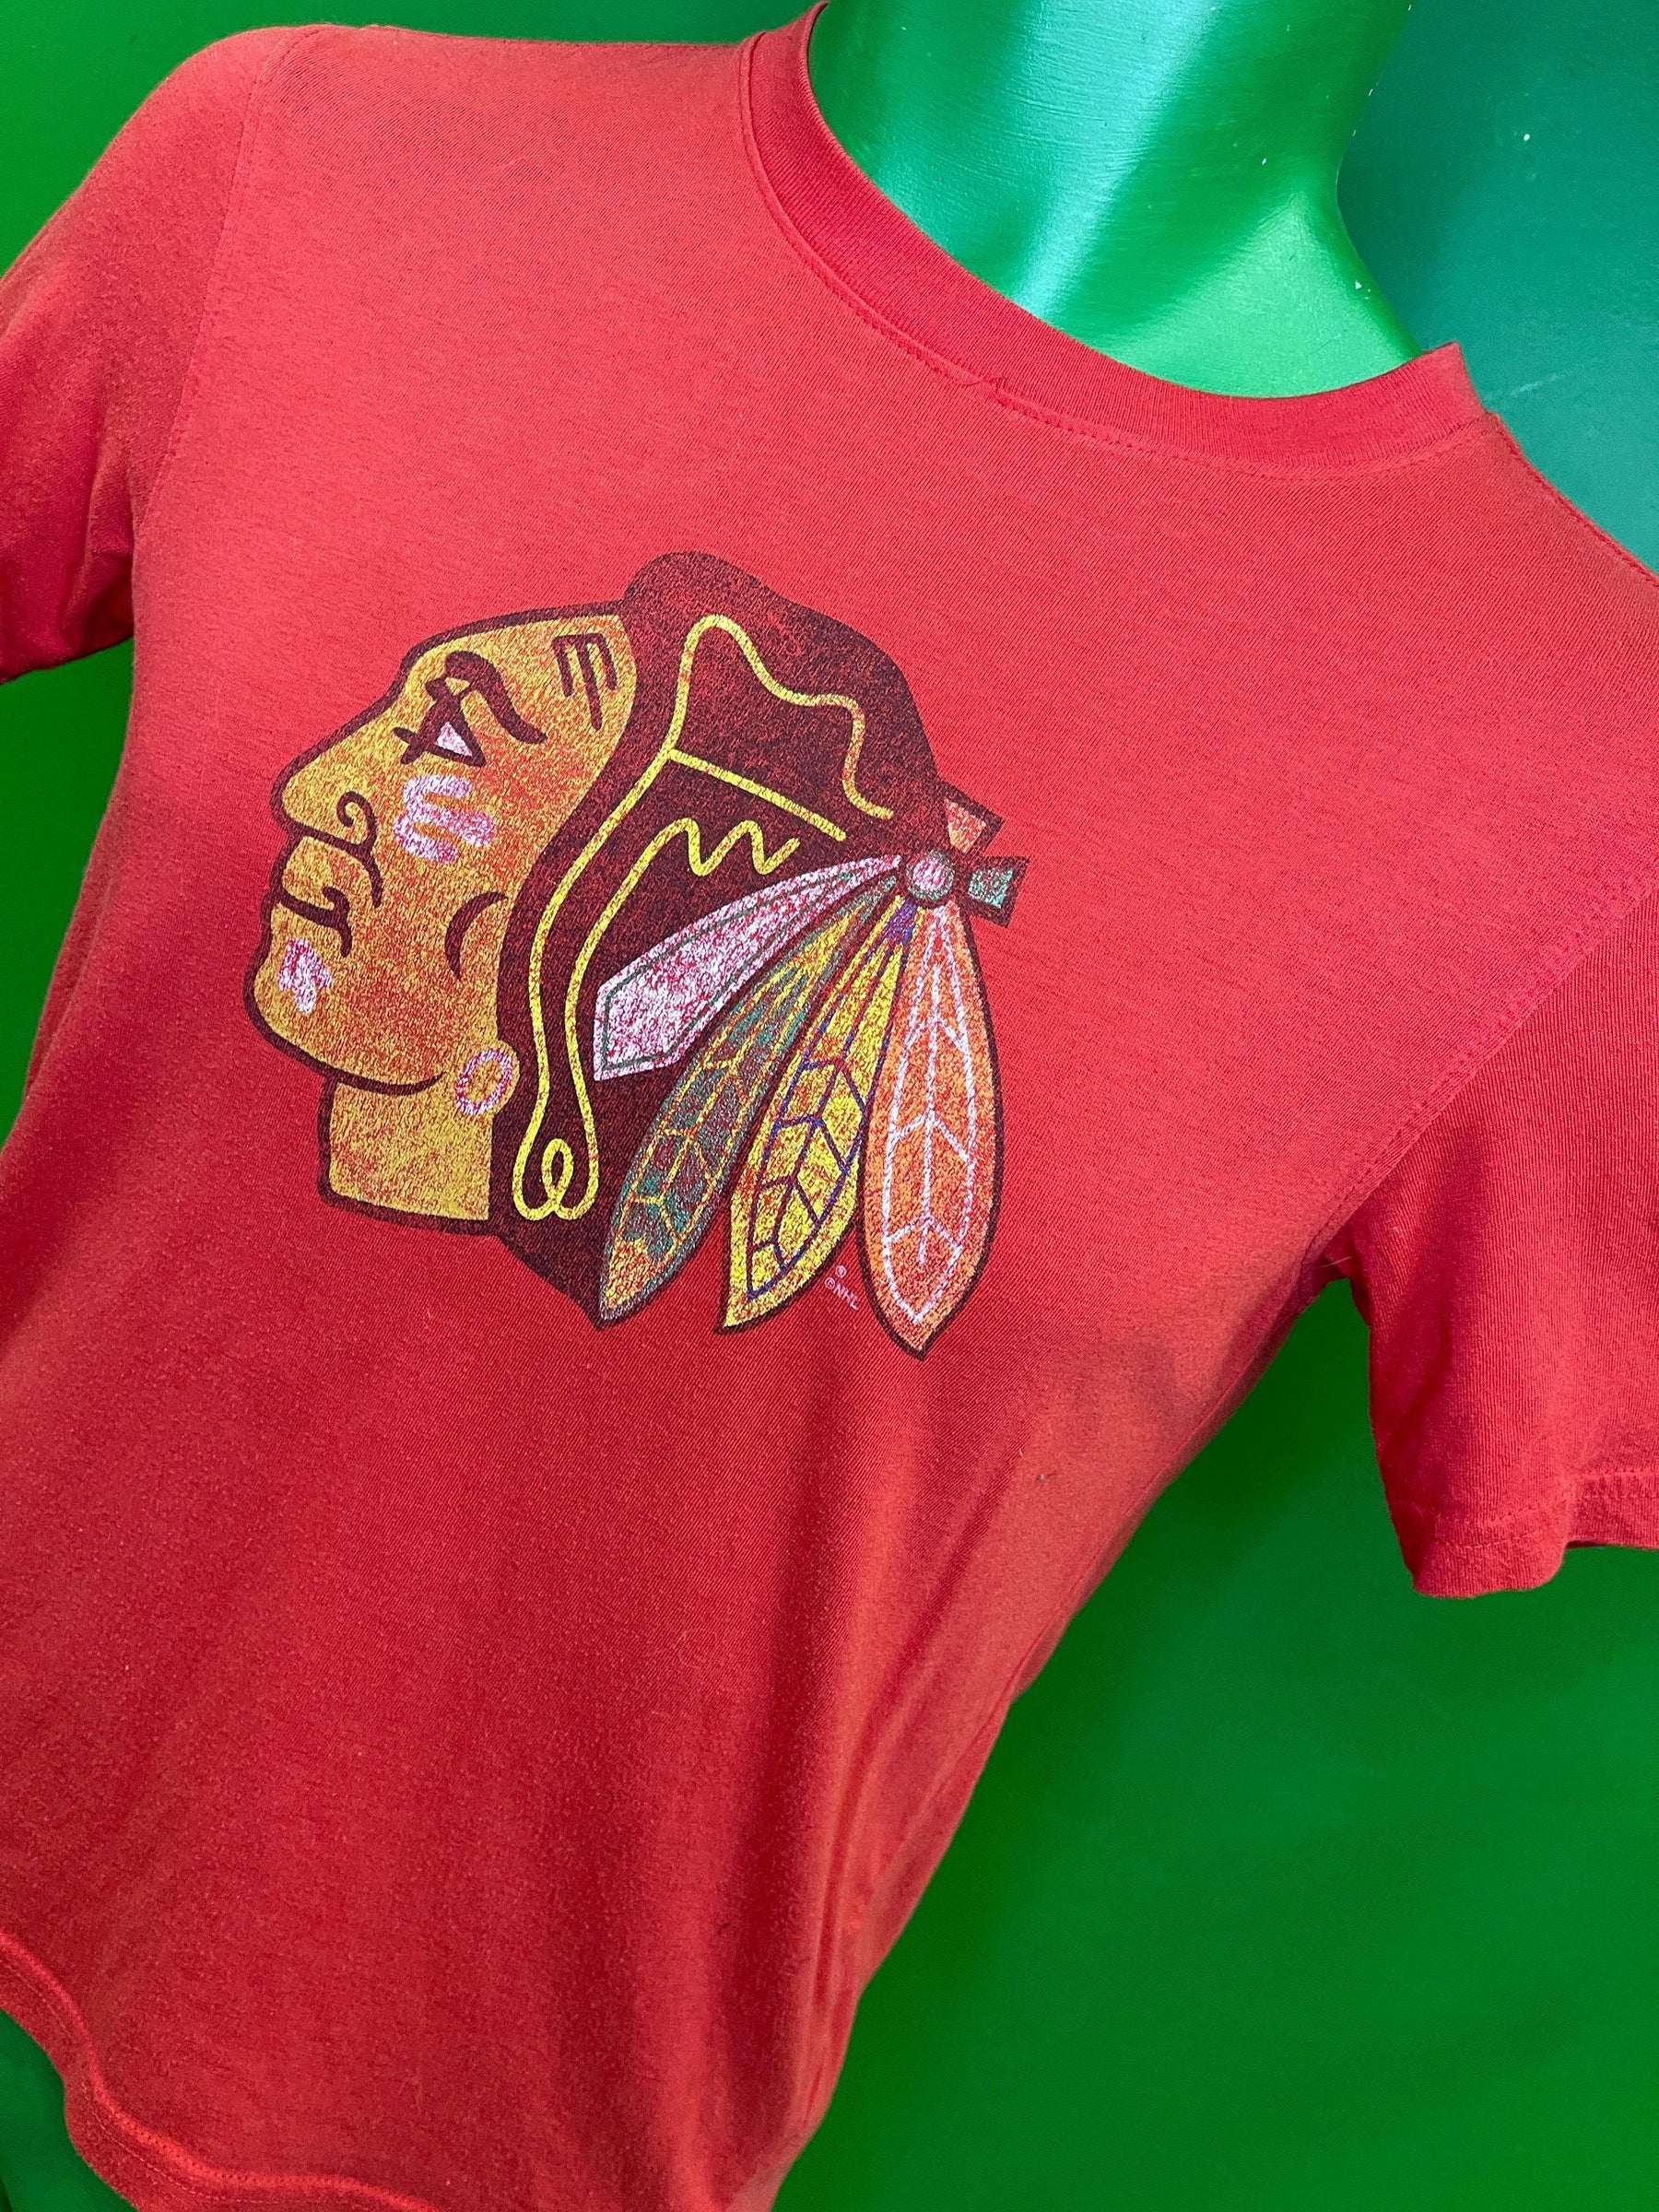 NHL Chicago Blackhawks Red T-Shirt Youth Small 8